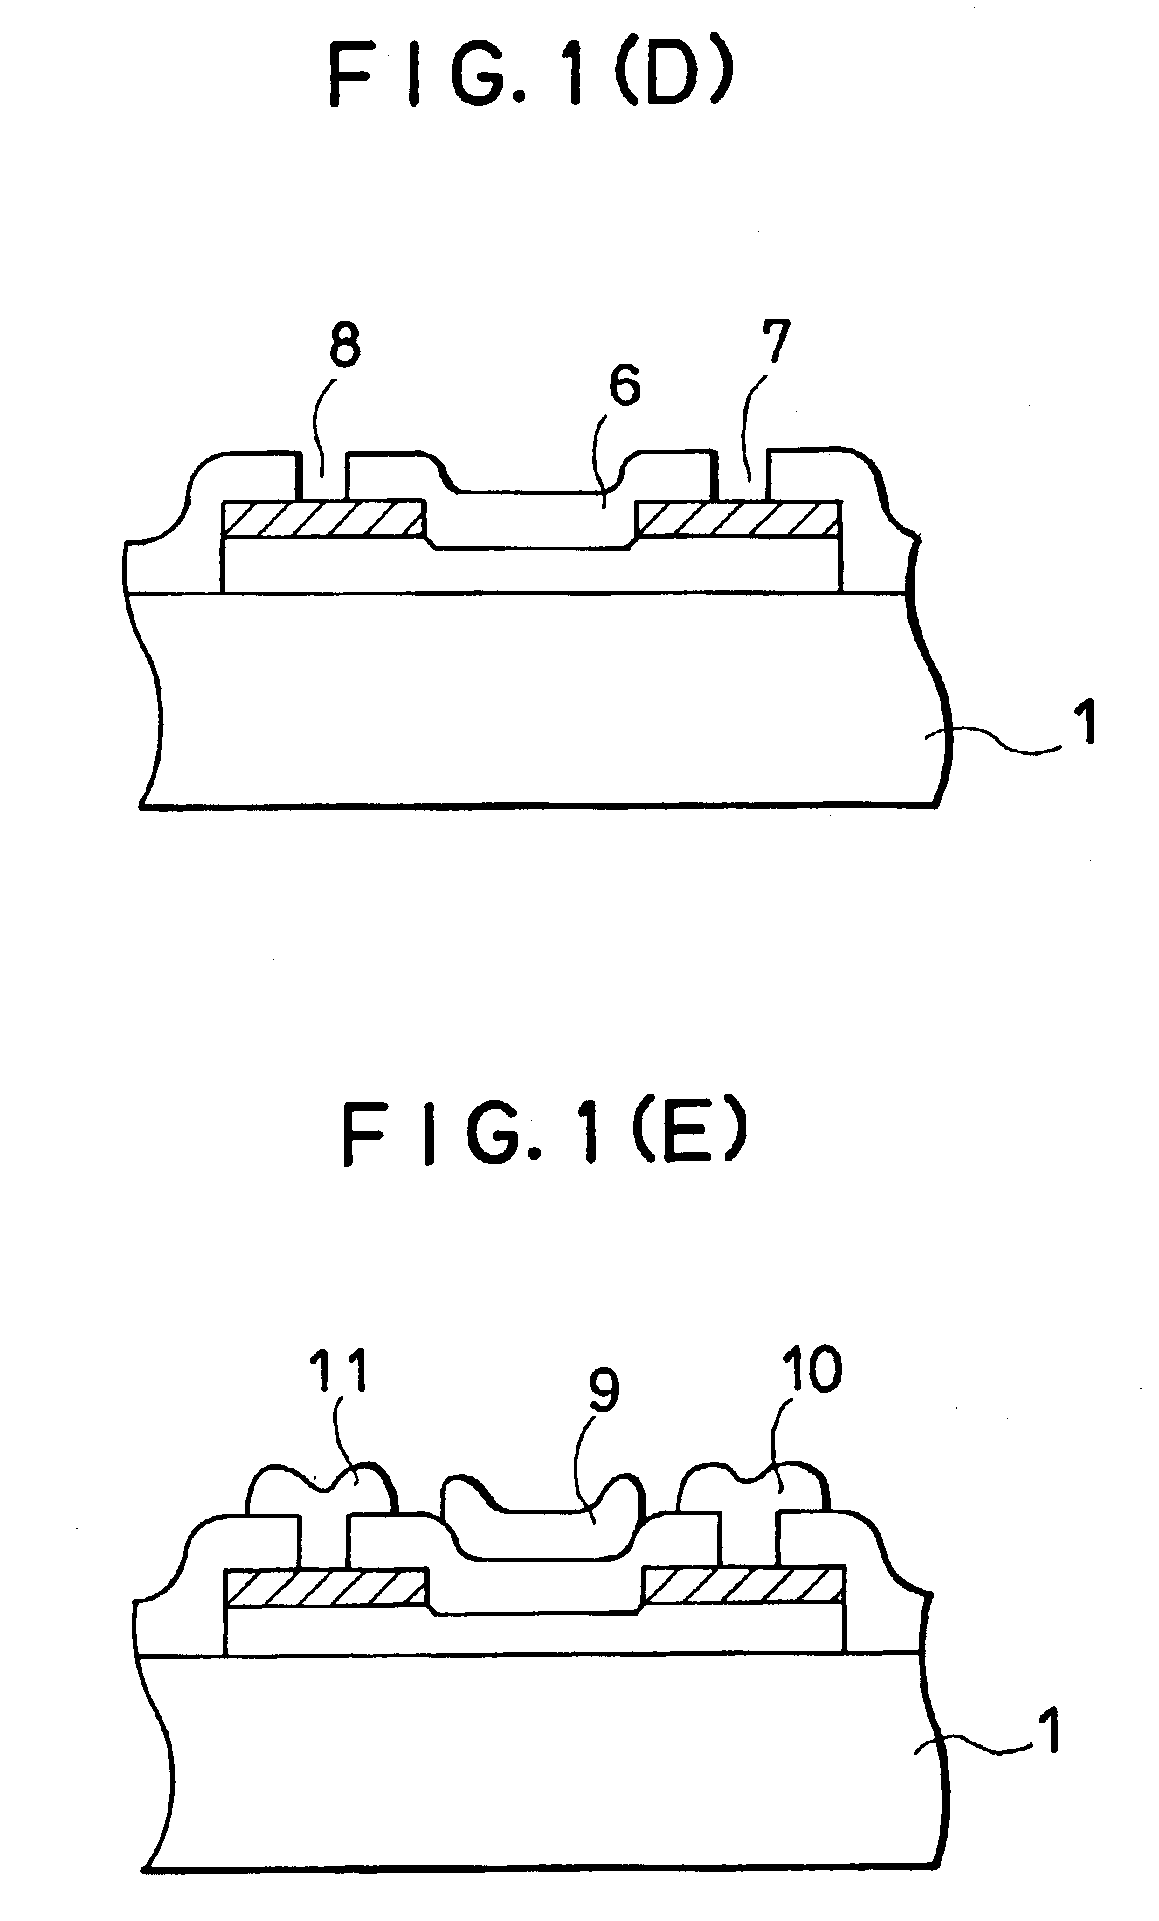 Method of forming an oxide film